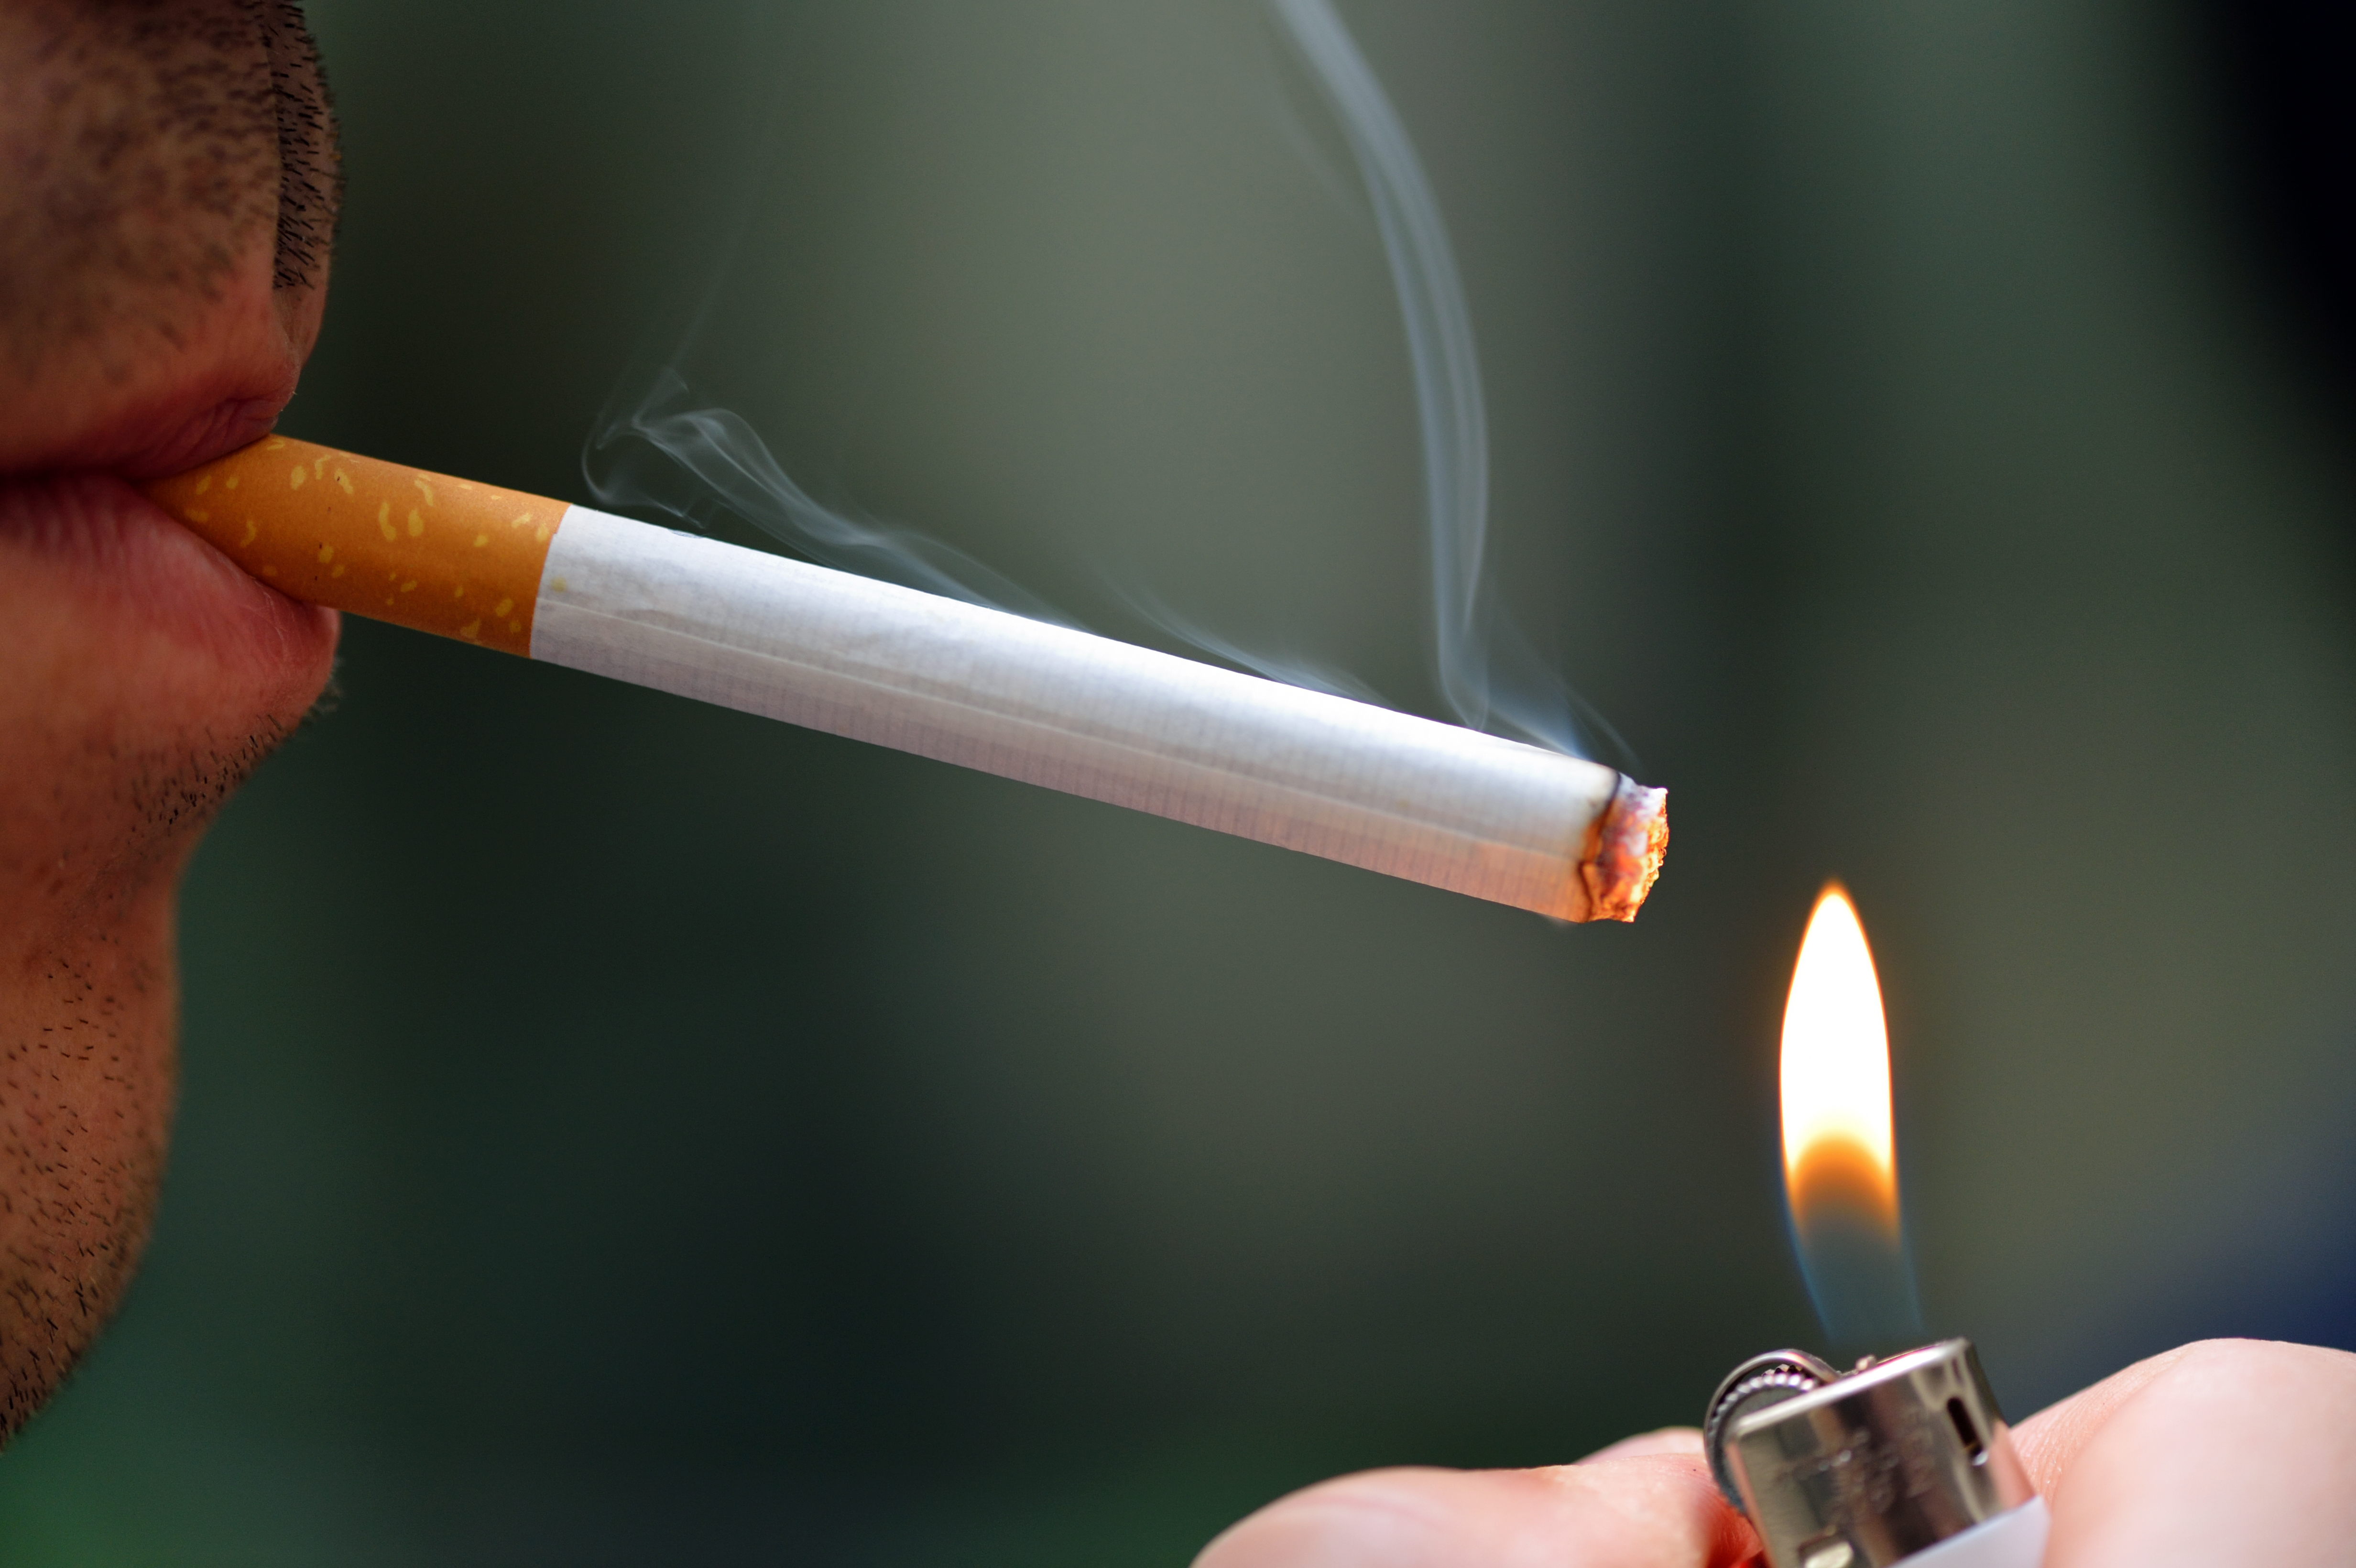 Cigarette prices may further drain wallets